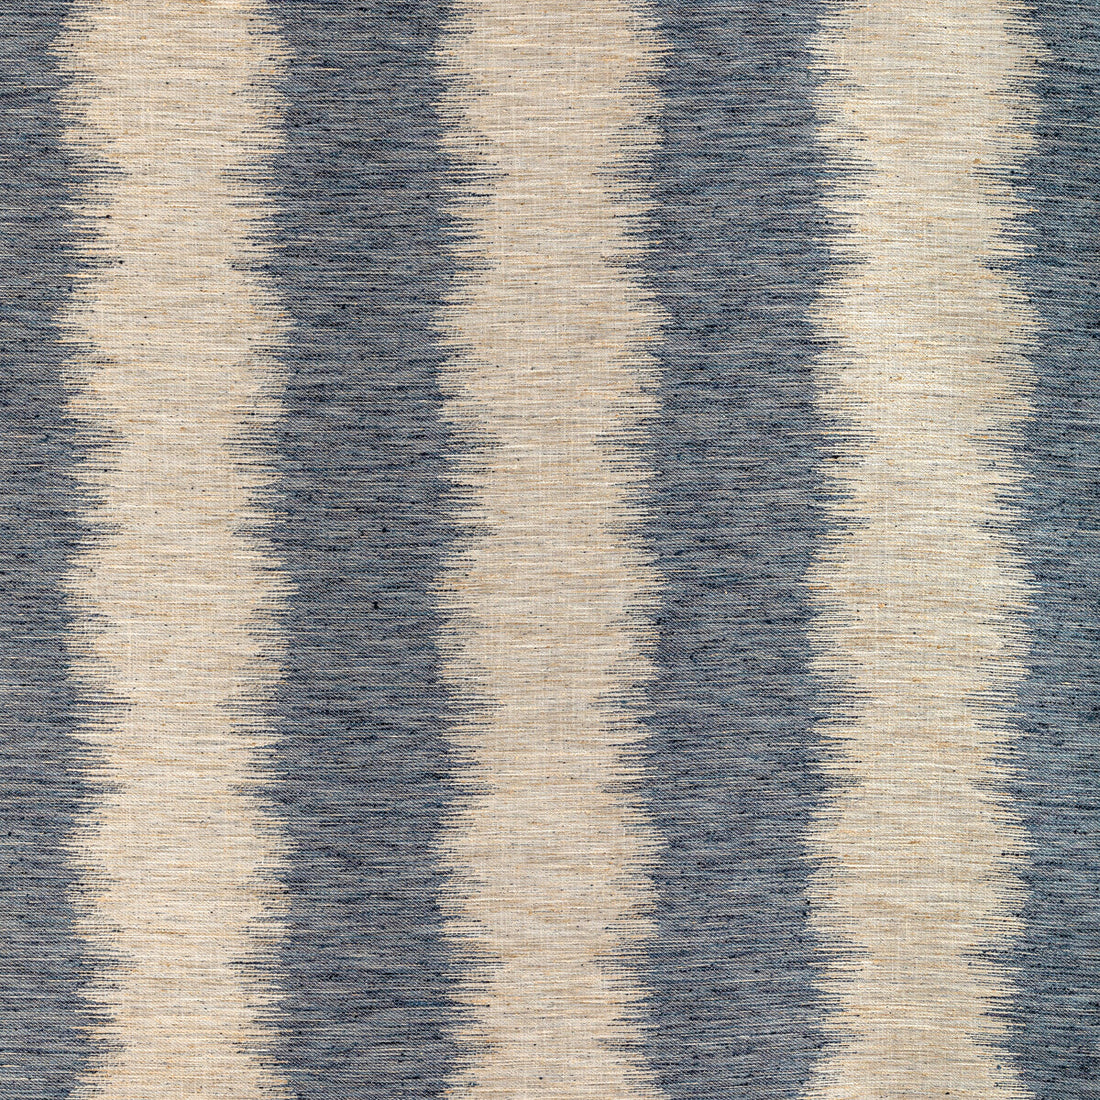 Kravet Design fabric in 36687-50 color - pattern 36687.50.0 - by Kravet Design in the Woven Colors collection